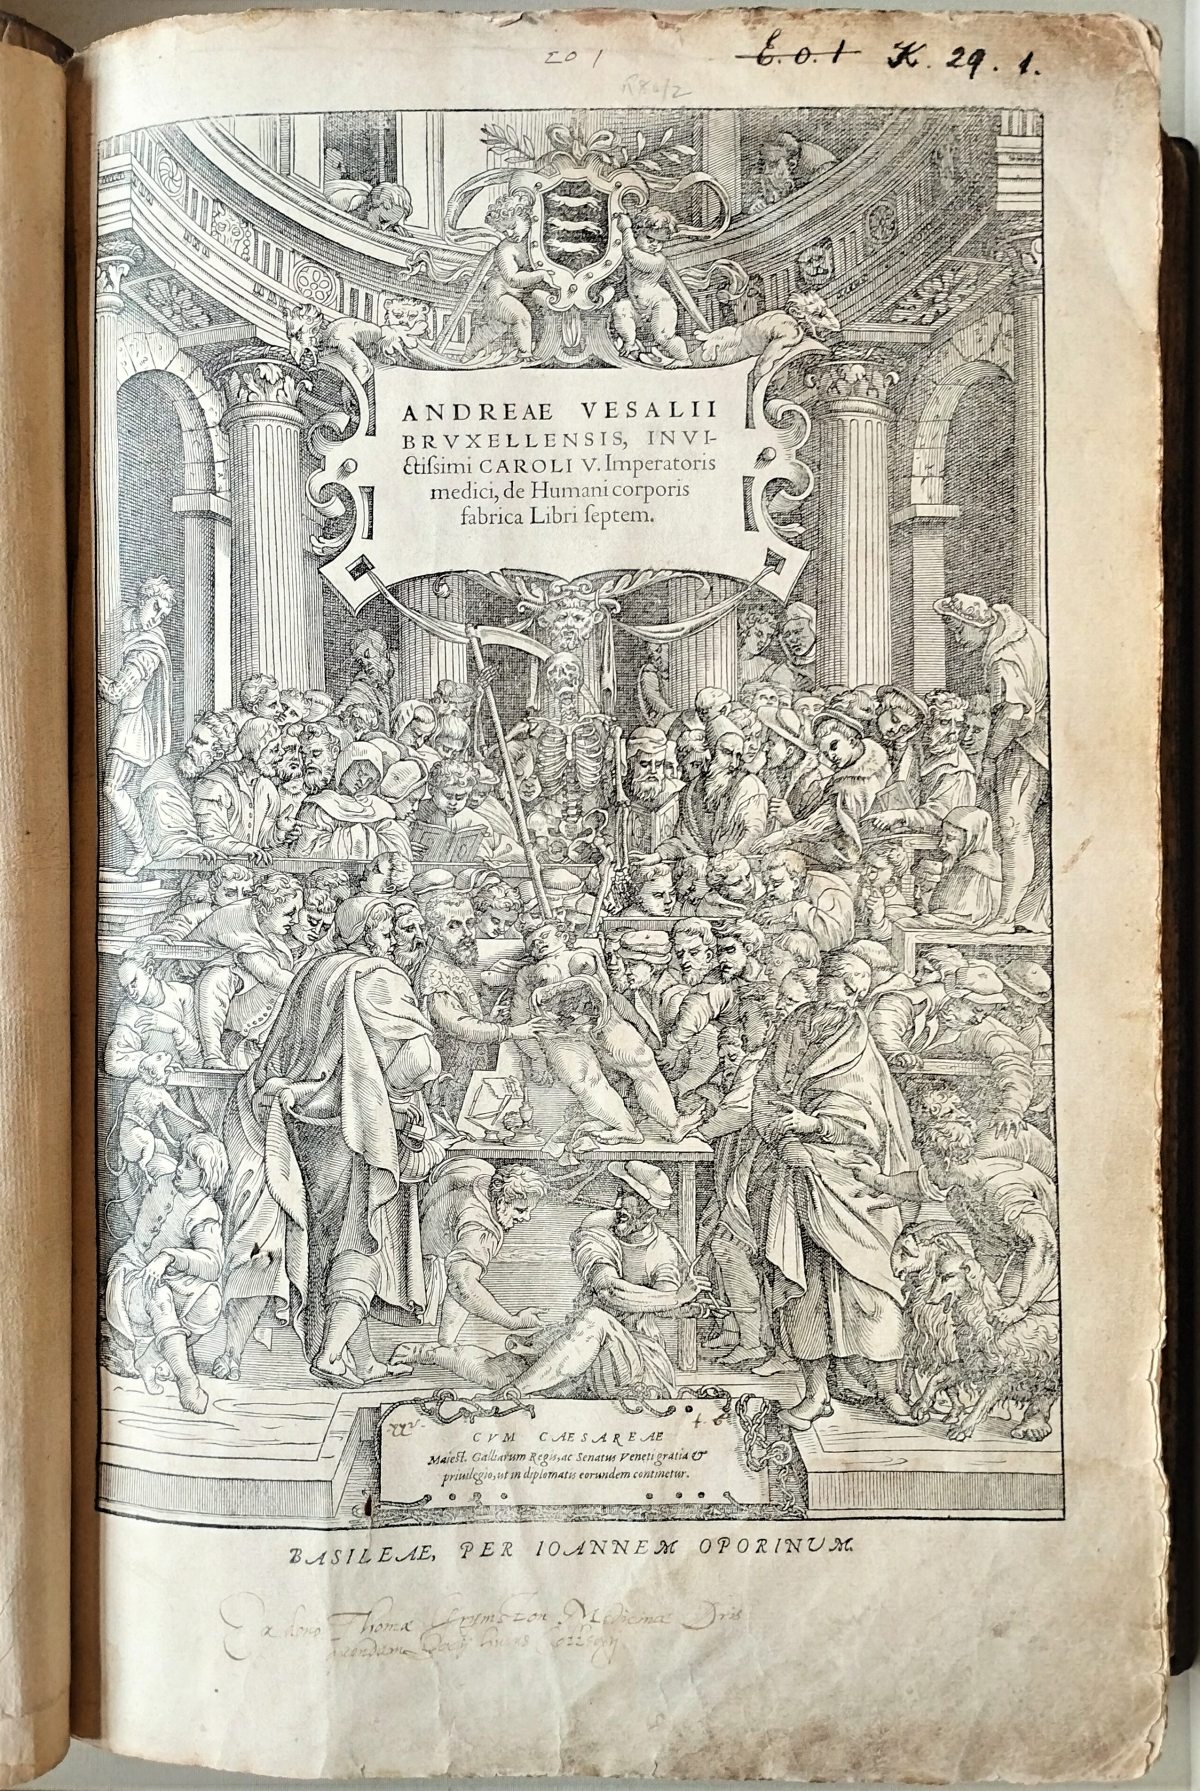 Illustrated title page of the book "De humani corporis fabrica libri septem" by Andreas Vesalius. A crowd watches the dissection of a woman. In the crowd there are men, children and animals.